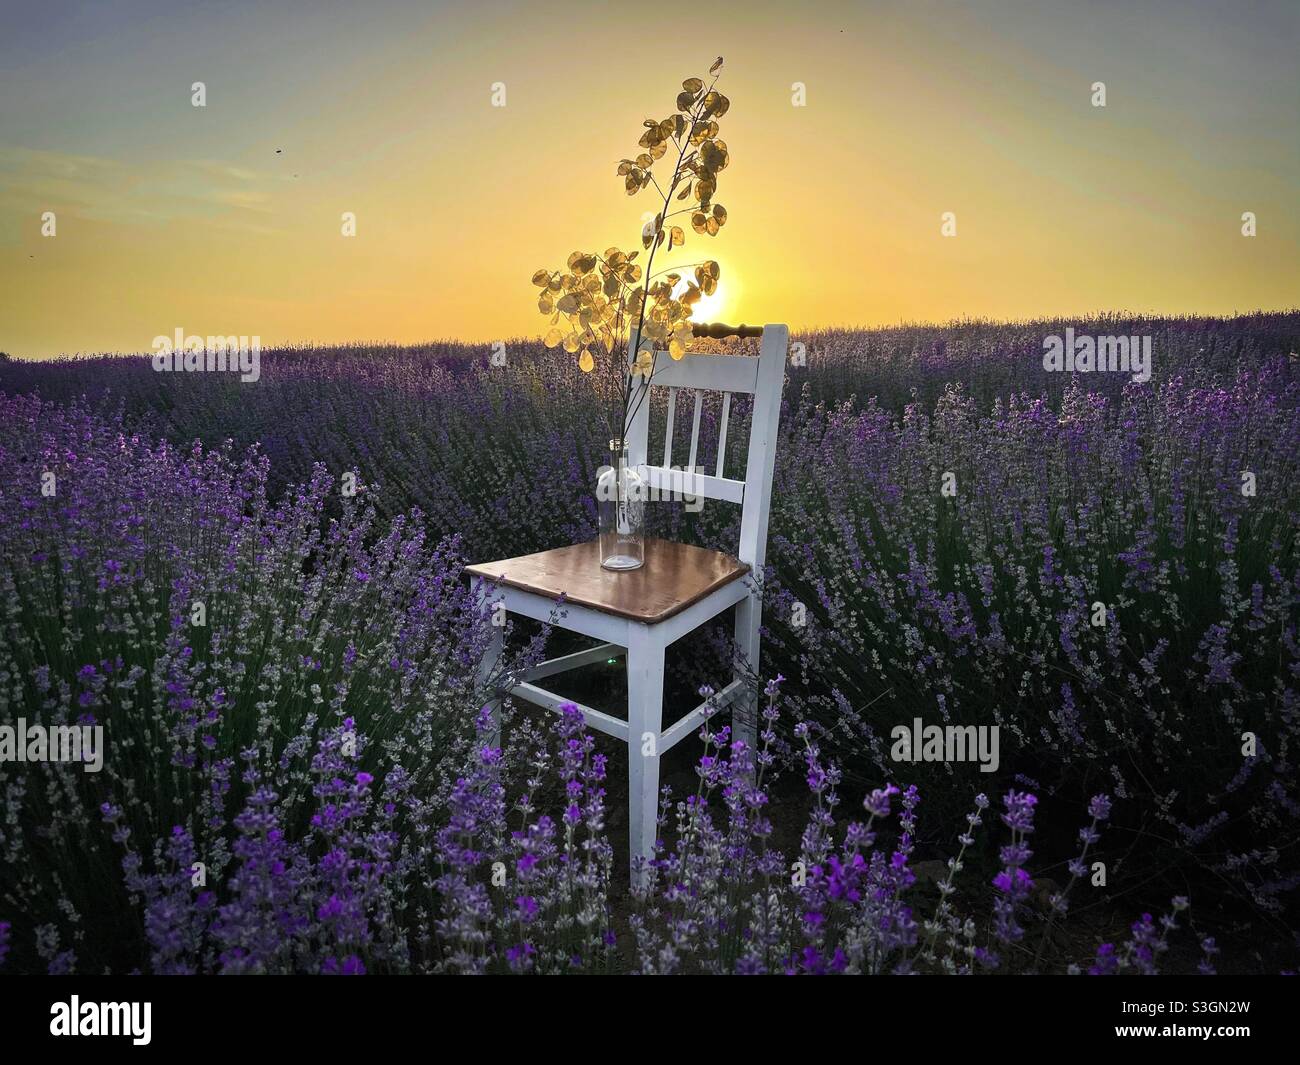 Wooden chair in a field of lavender at sunset Stock Photo